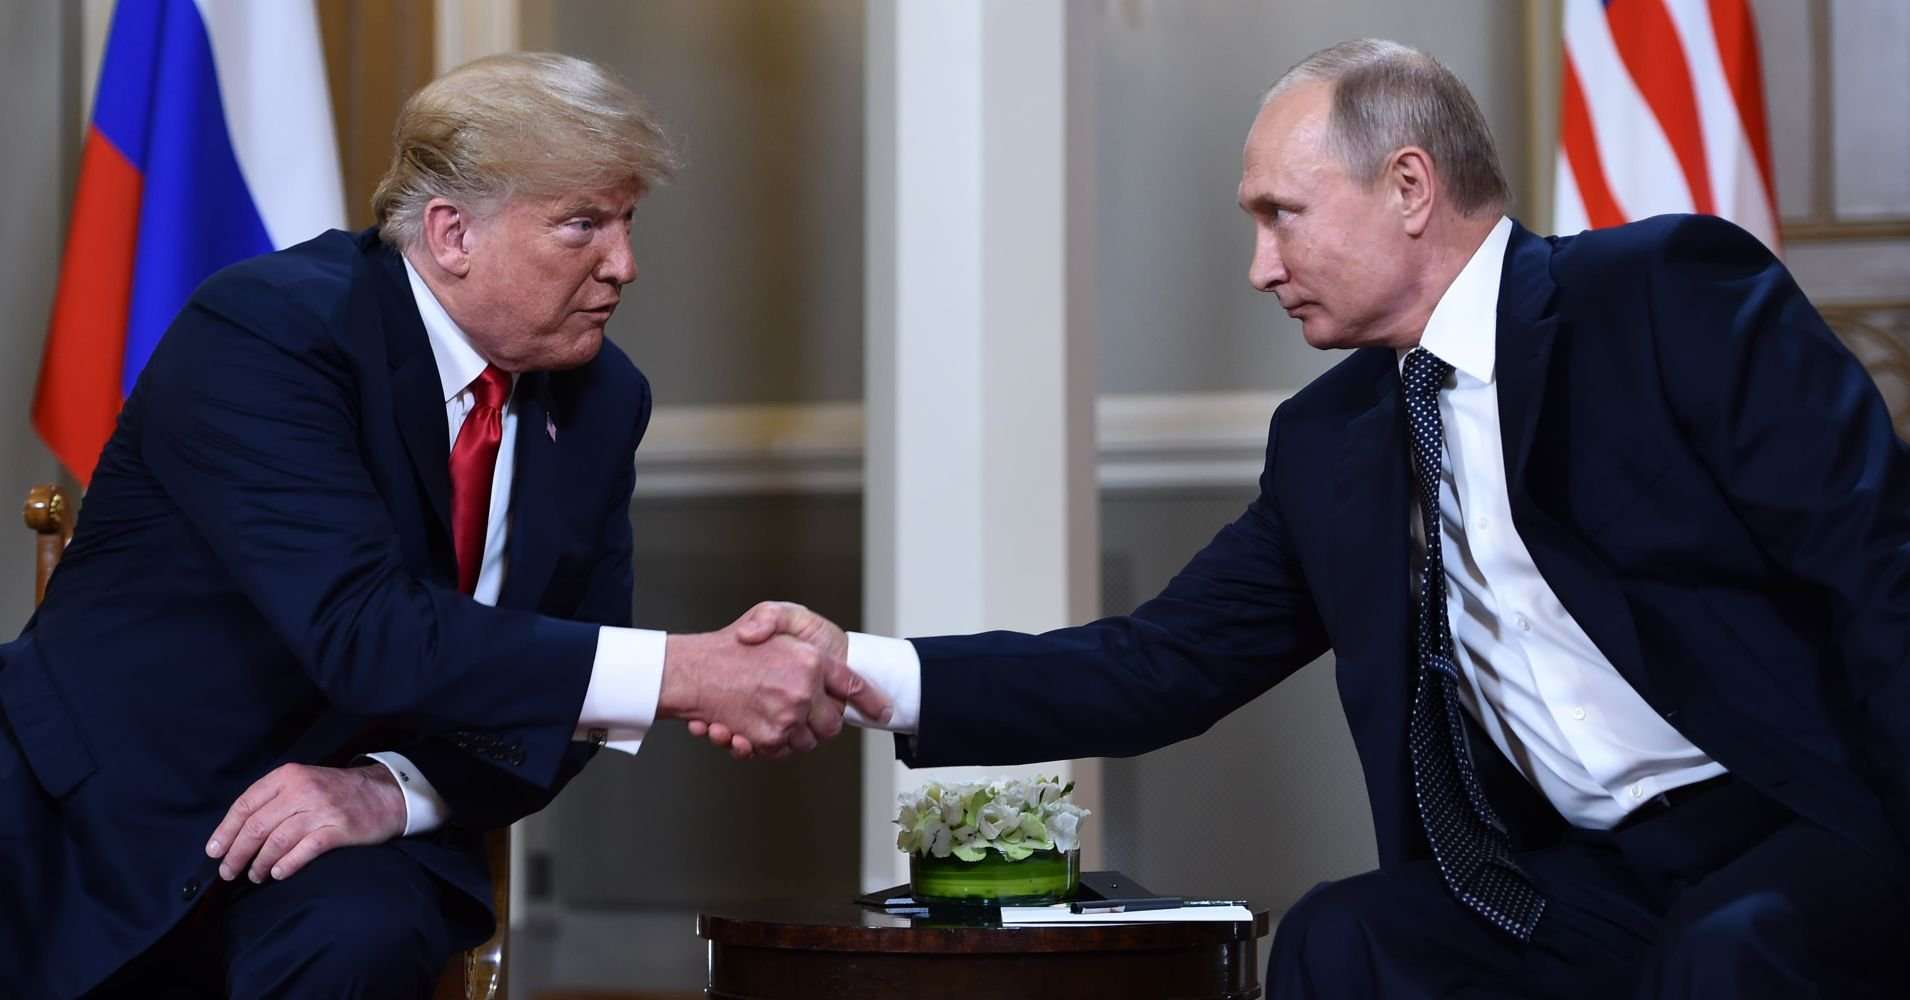 image for Trump refuses to denounce Putin over election meddling at summit, blames 'both countries'